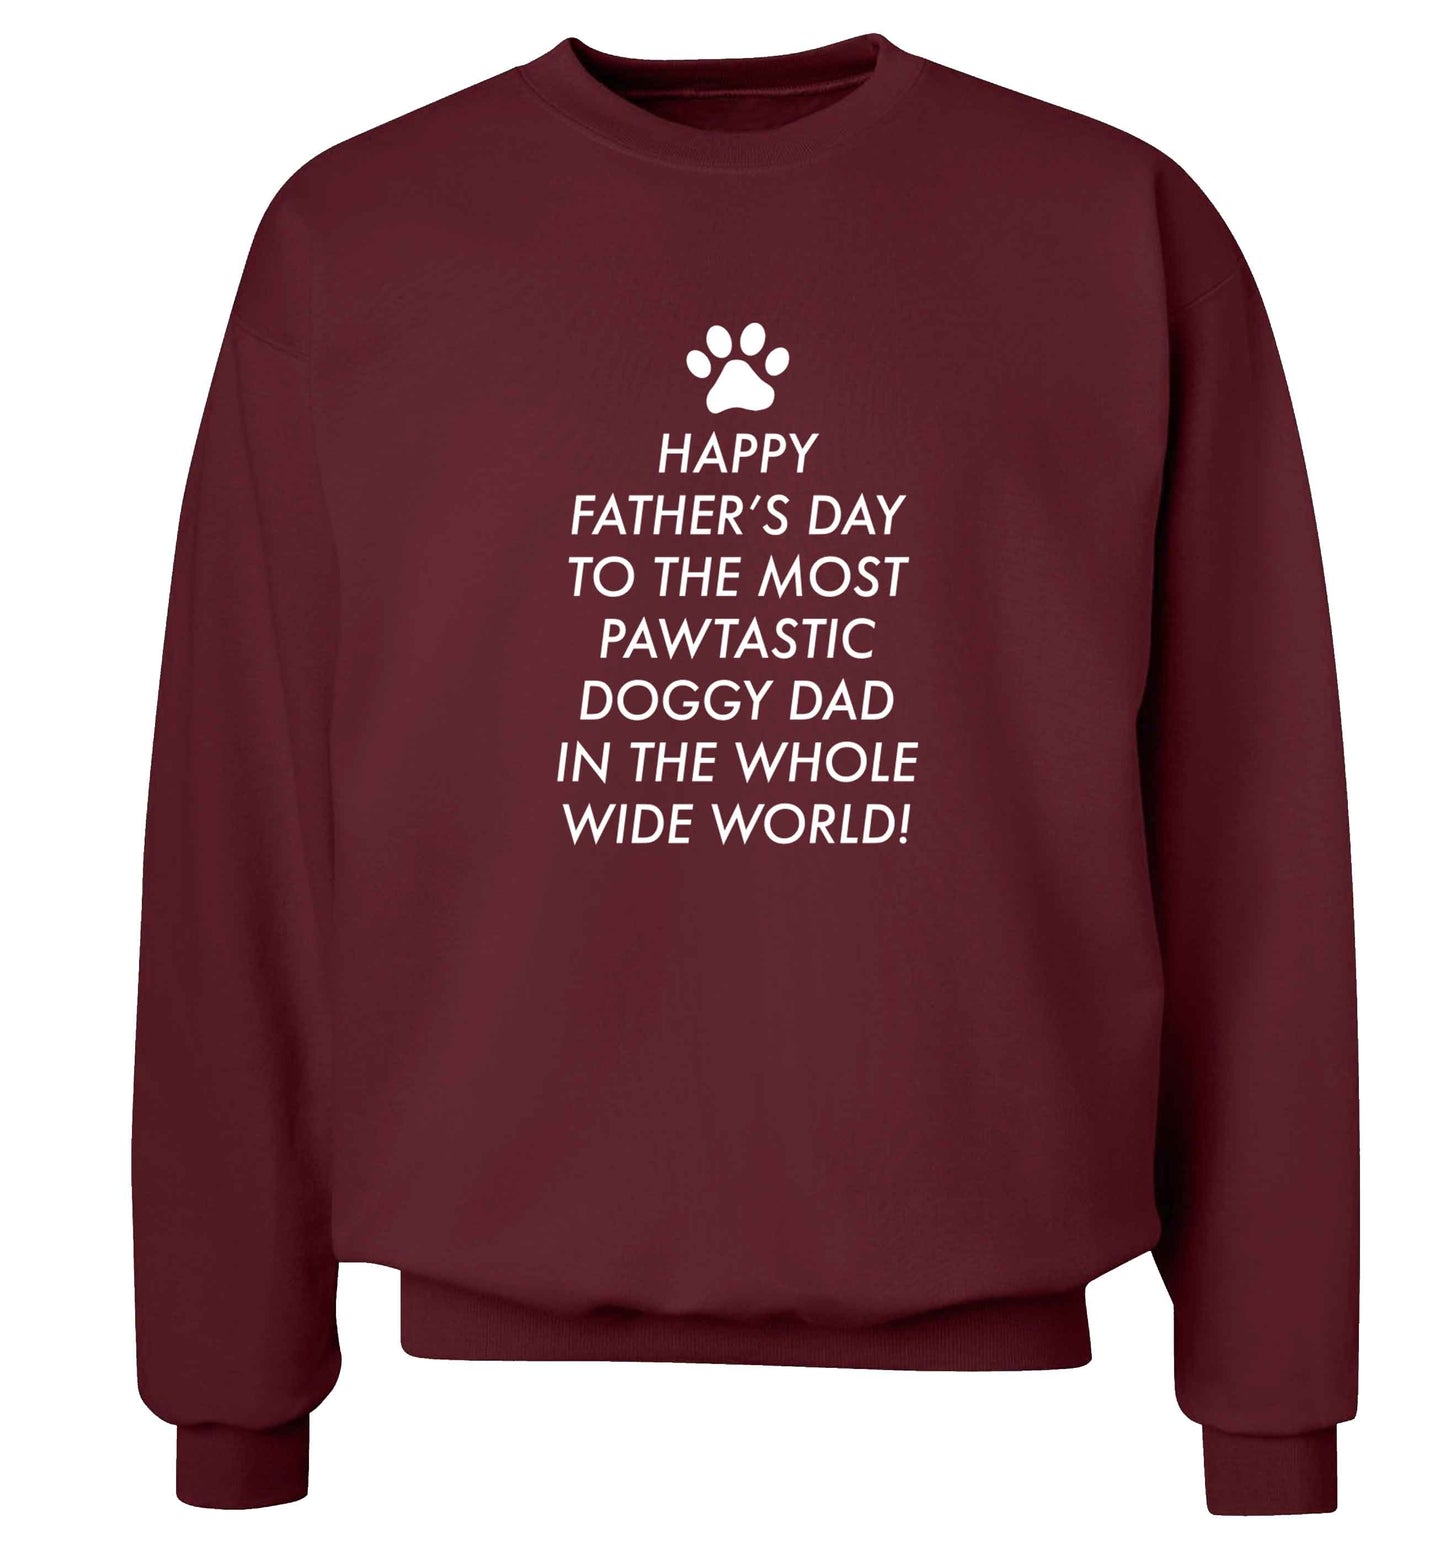 Happy Father's day to the most pawtastic doggy dad in the whole wide world!adult's unisex maroon sweater 2XL